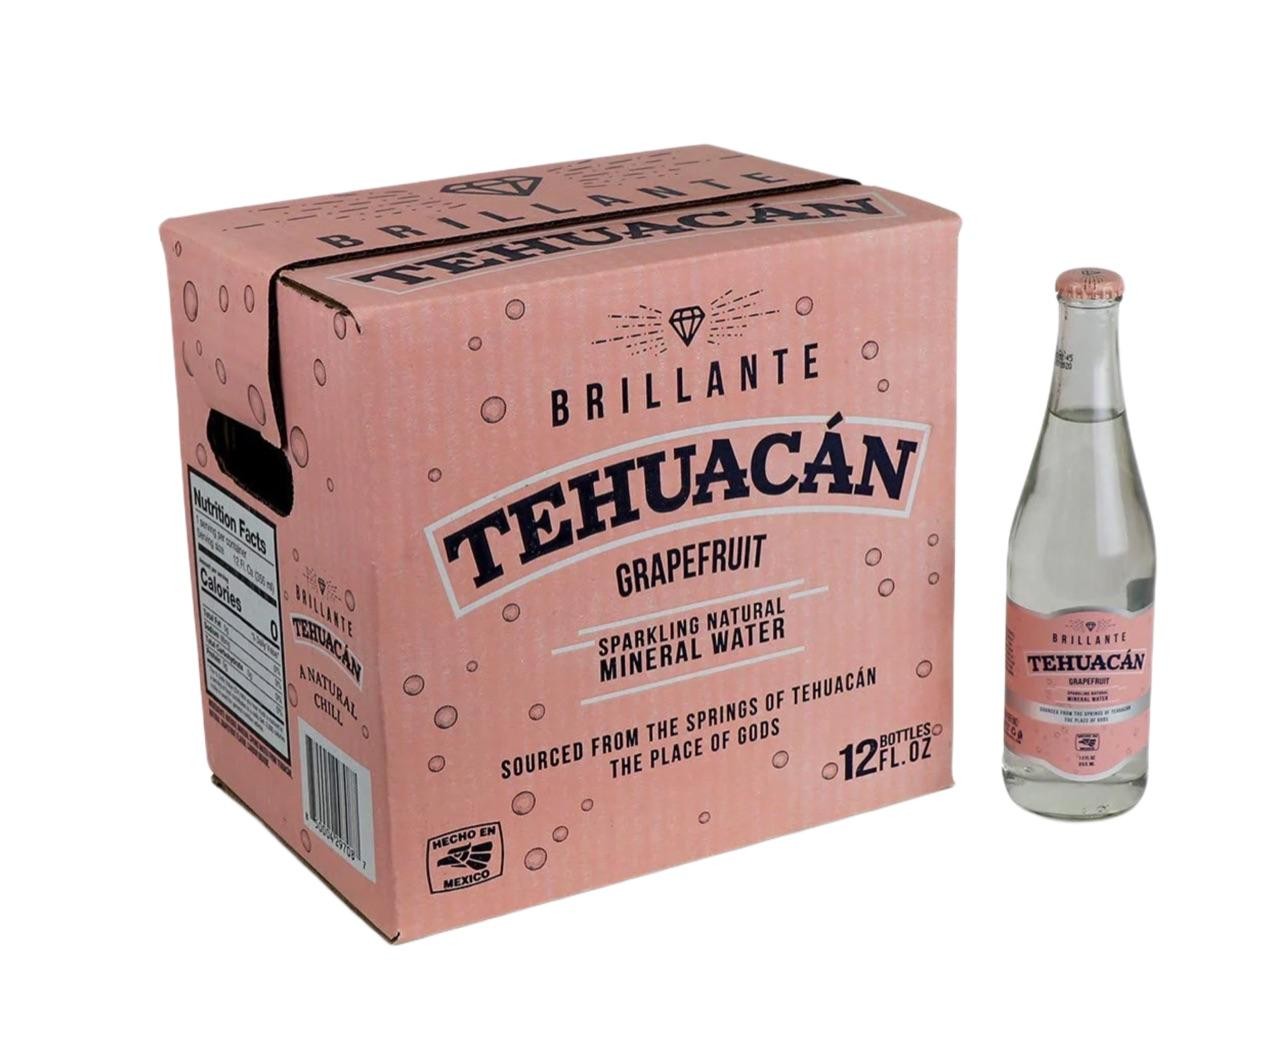 Tehuacan Brillante Mineral Water with Grapefruit (12 oz)